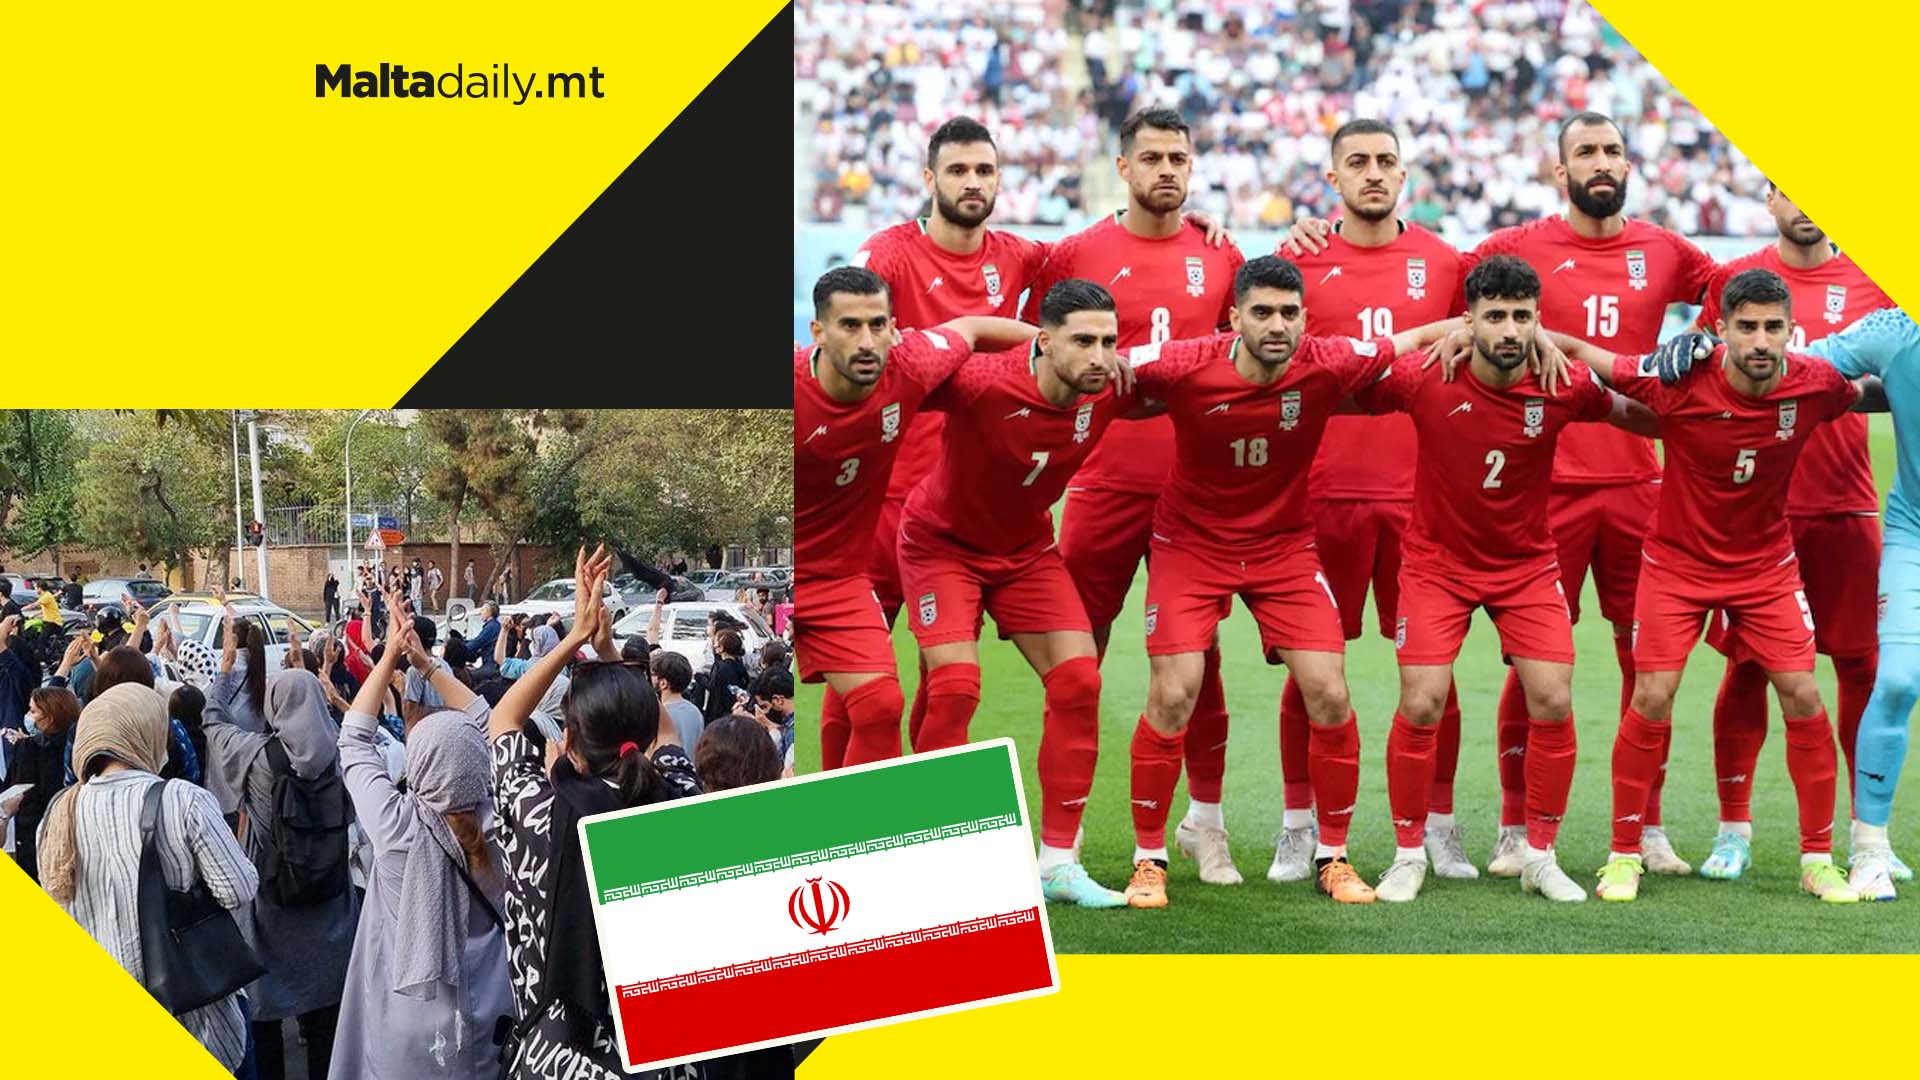 Iranian players refuse singing national anthem in show of solidarity